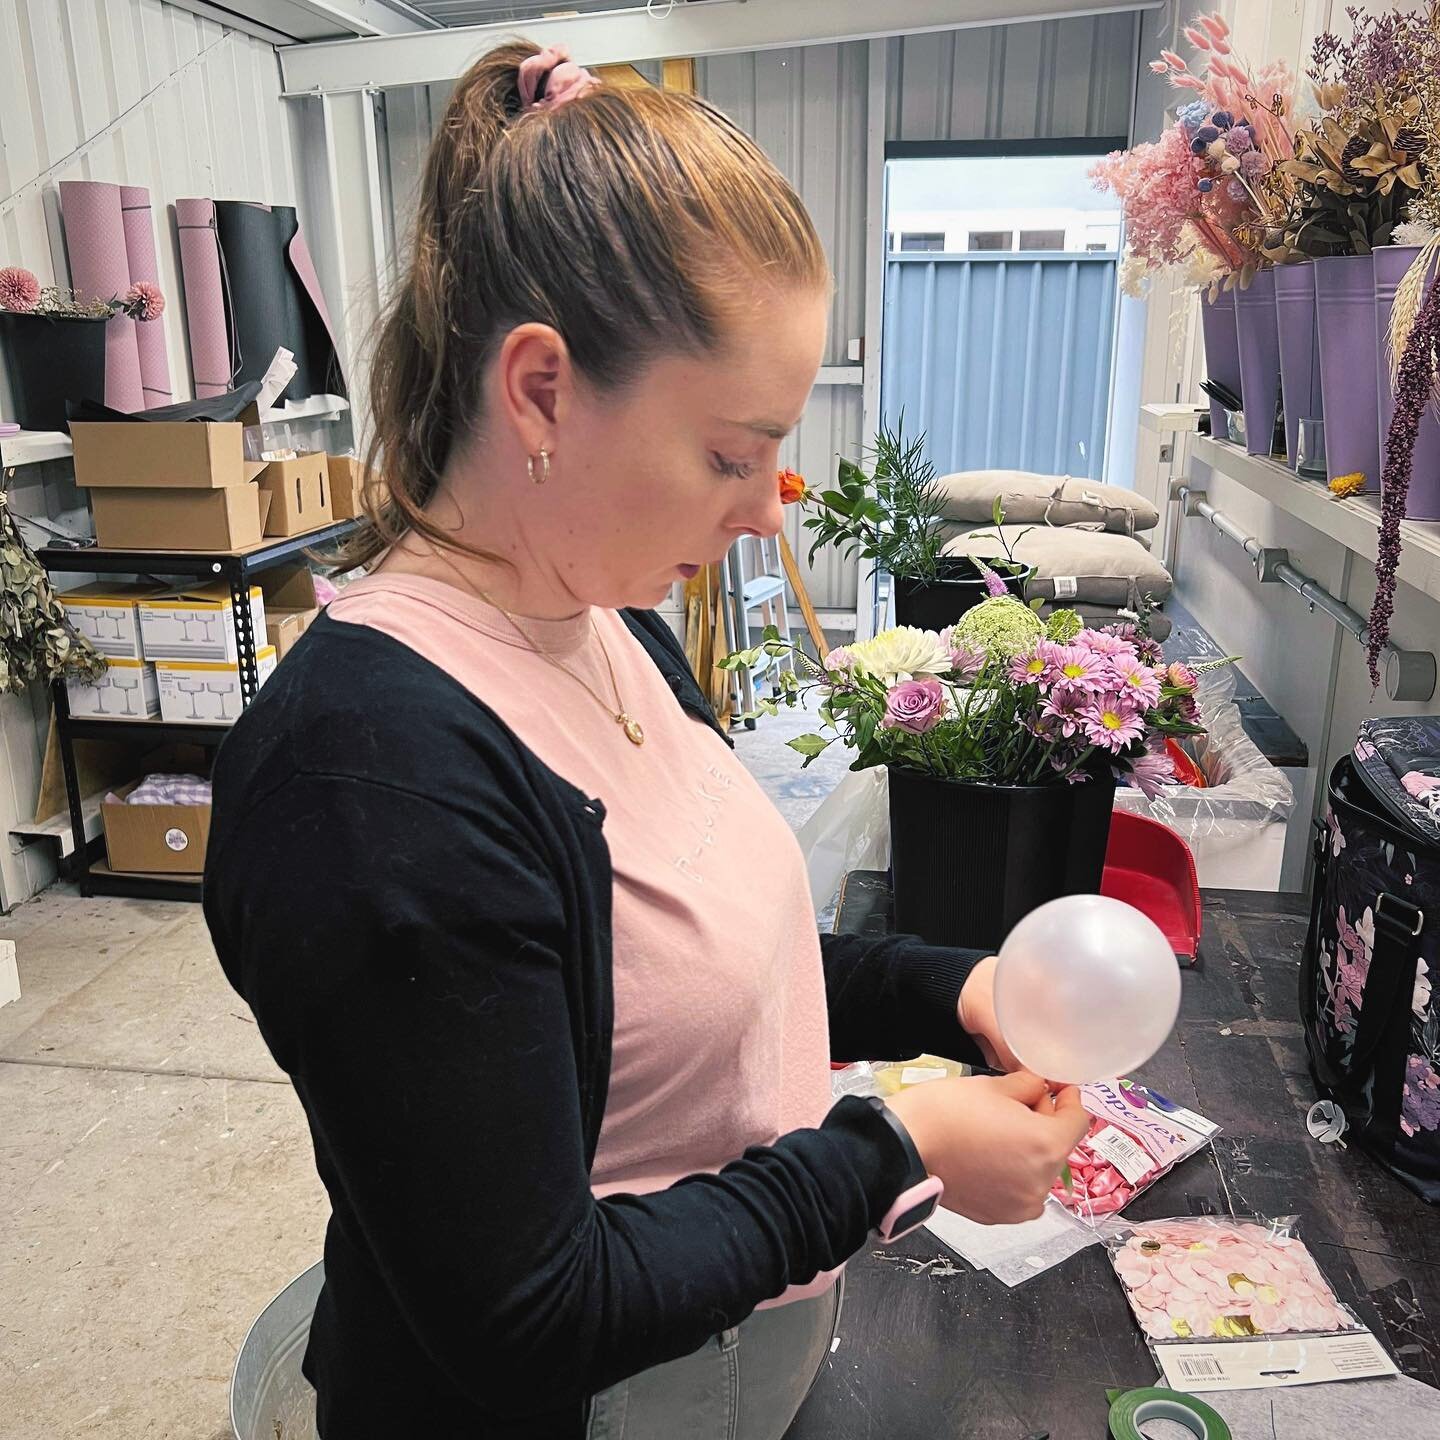 Lovely Abbey worked with her Florist trainer and support staff to develop this beautiful Mothers Day hat box! It&rsquo;ll be online next week for pre order for all the beautiful, special Mums out there! We think Abbey has done an amazing job and can&